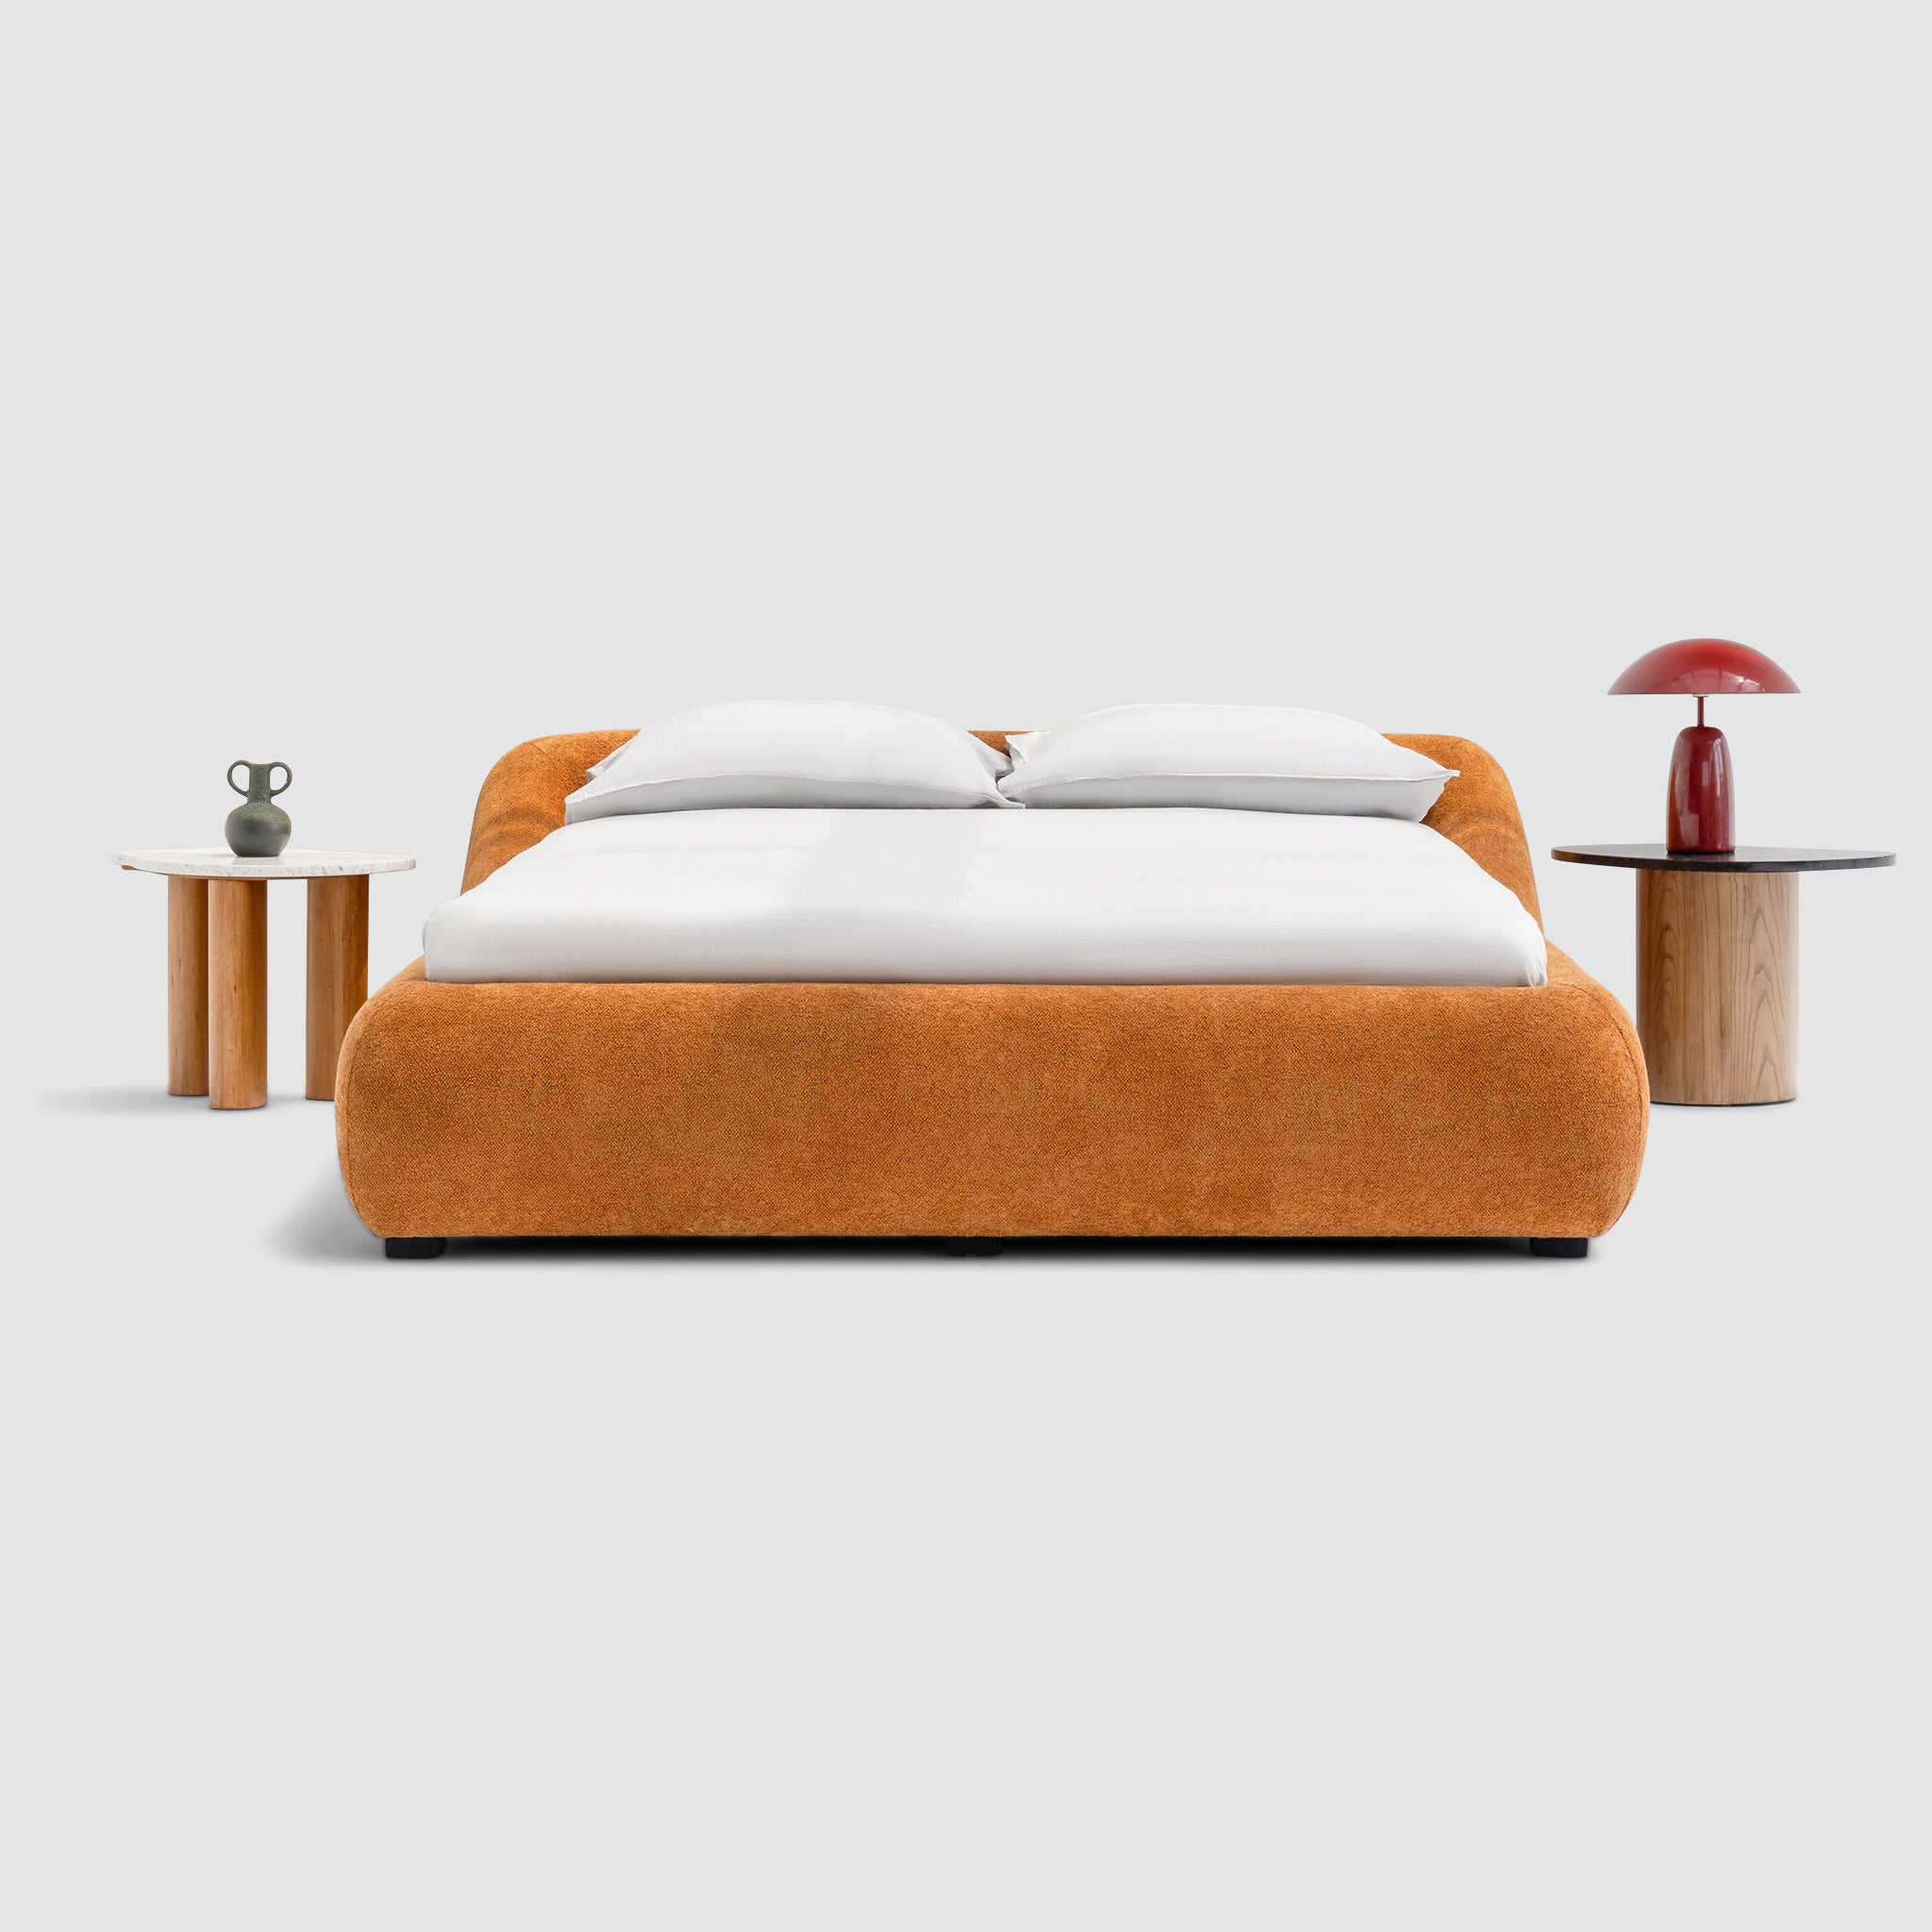 Sleek, low-profile platform bed with a minimalist headboard. The Alain Bed by Klettkic offers modern design in solid wood. Choose your upholstery for a personalized touch.